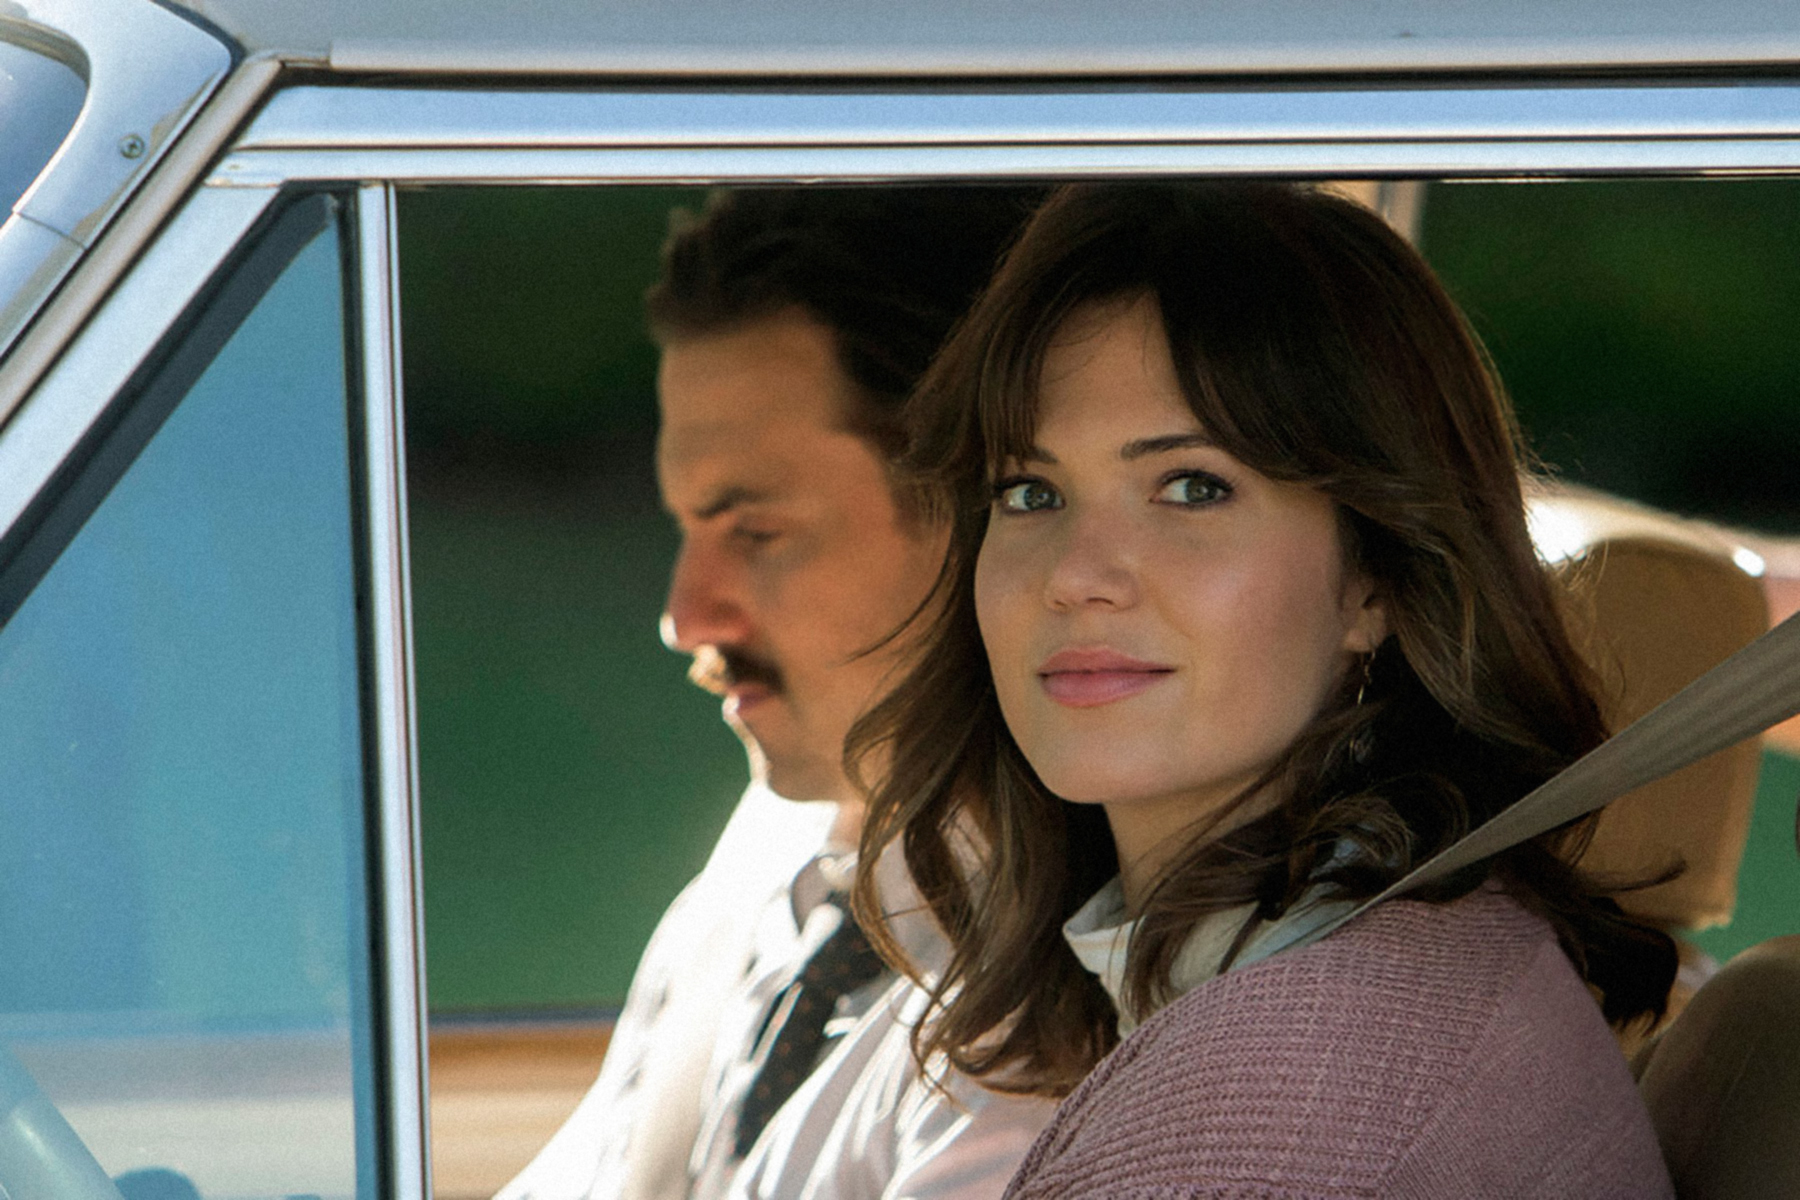 Jack Pearson and Rebecca Pearson from the TV show &quot;This Is Us&quot; are shown seated in a car, viewed through the open window